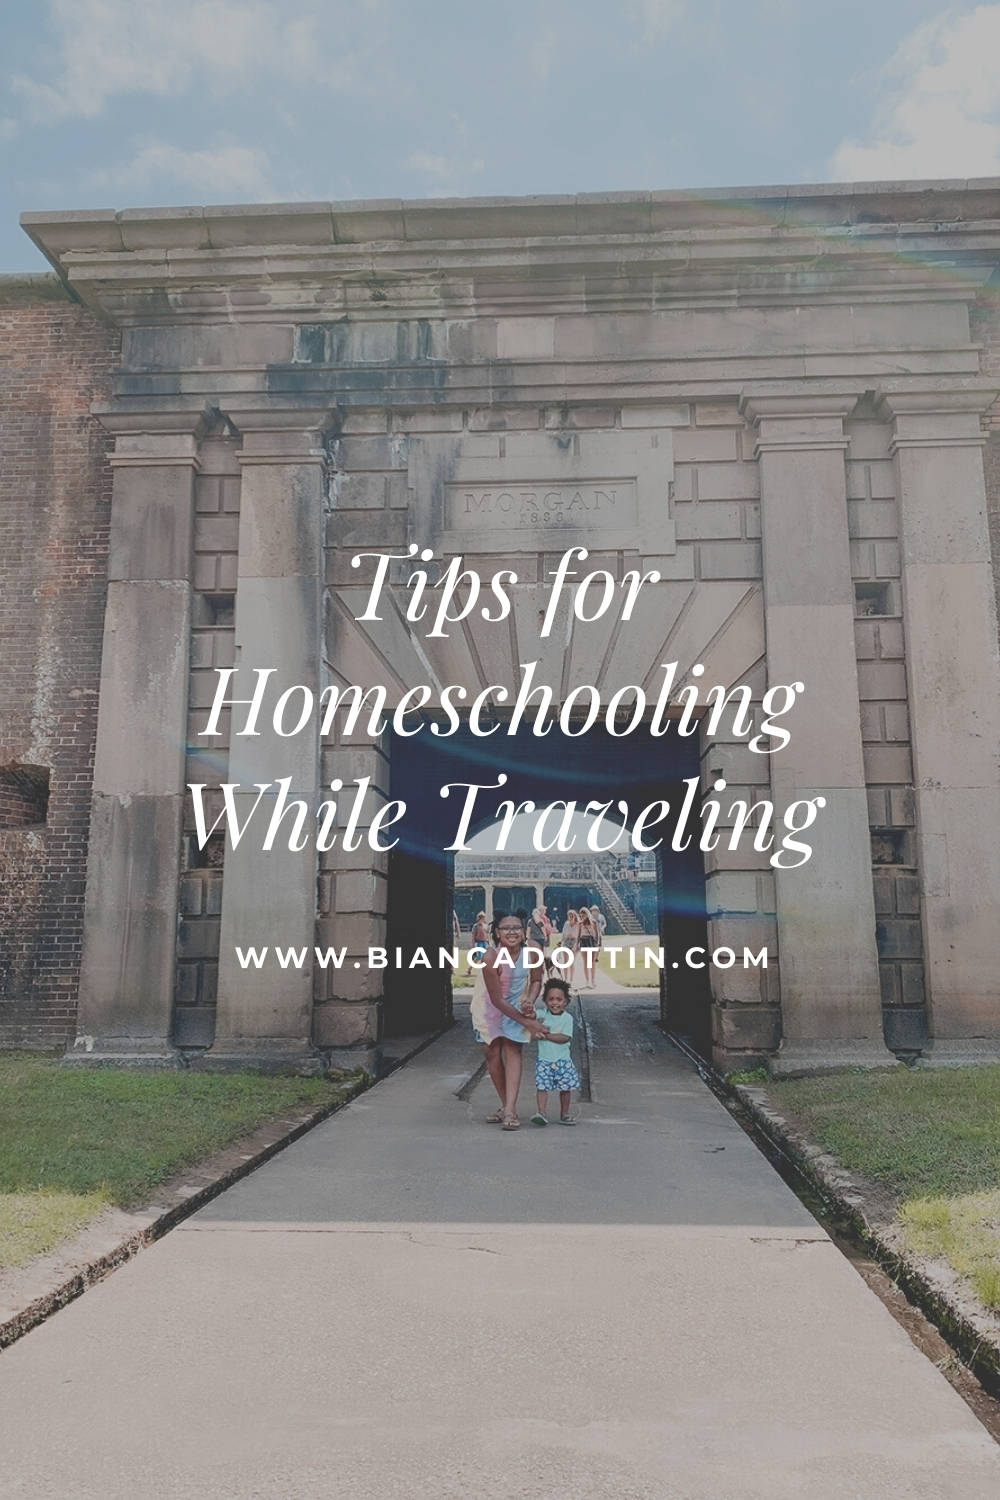 Tips for Homeschooling While Traveling